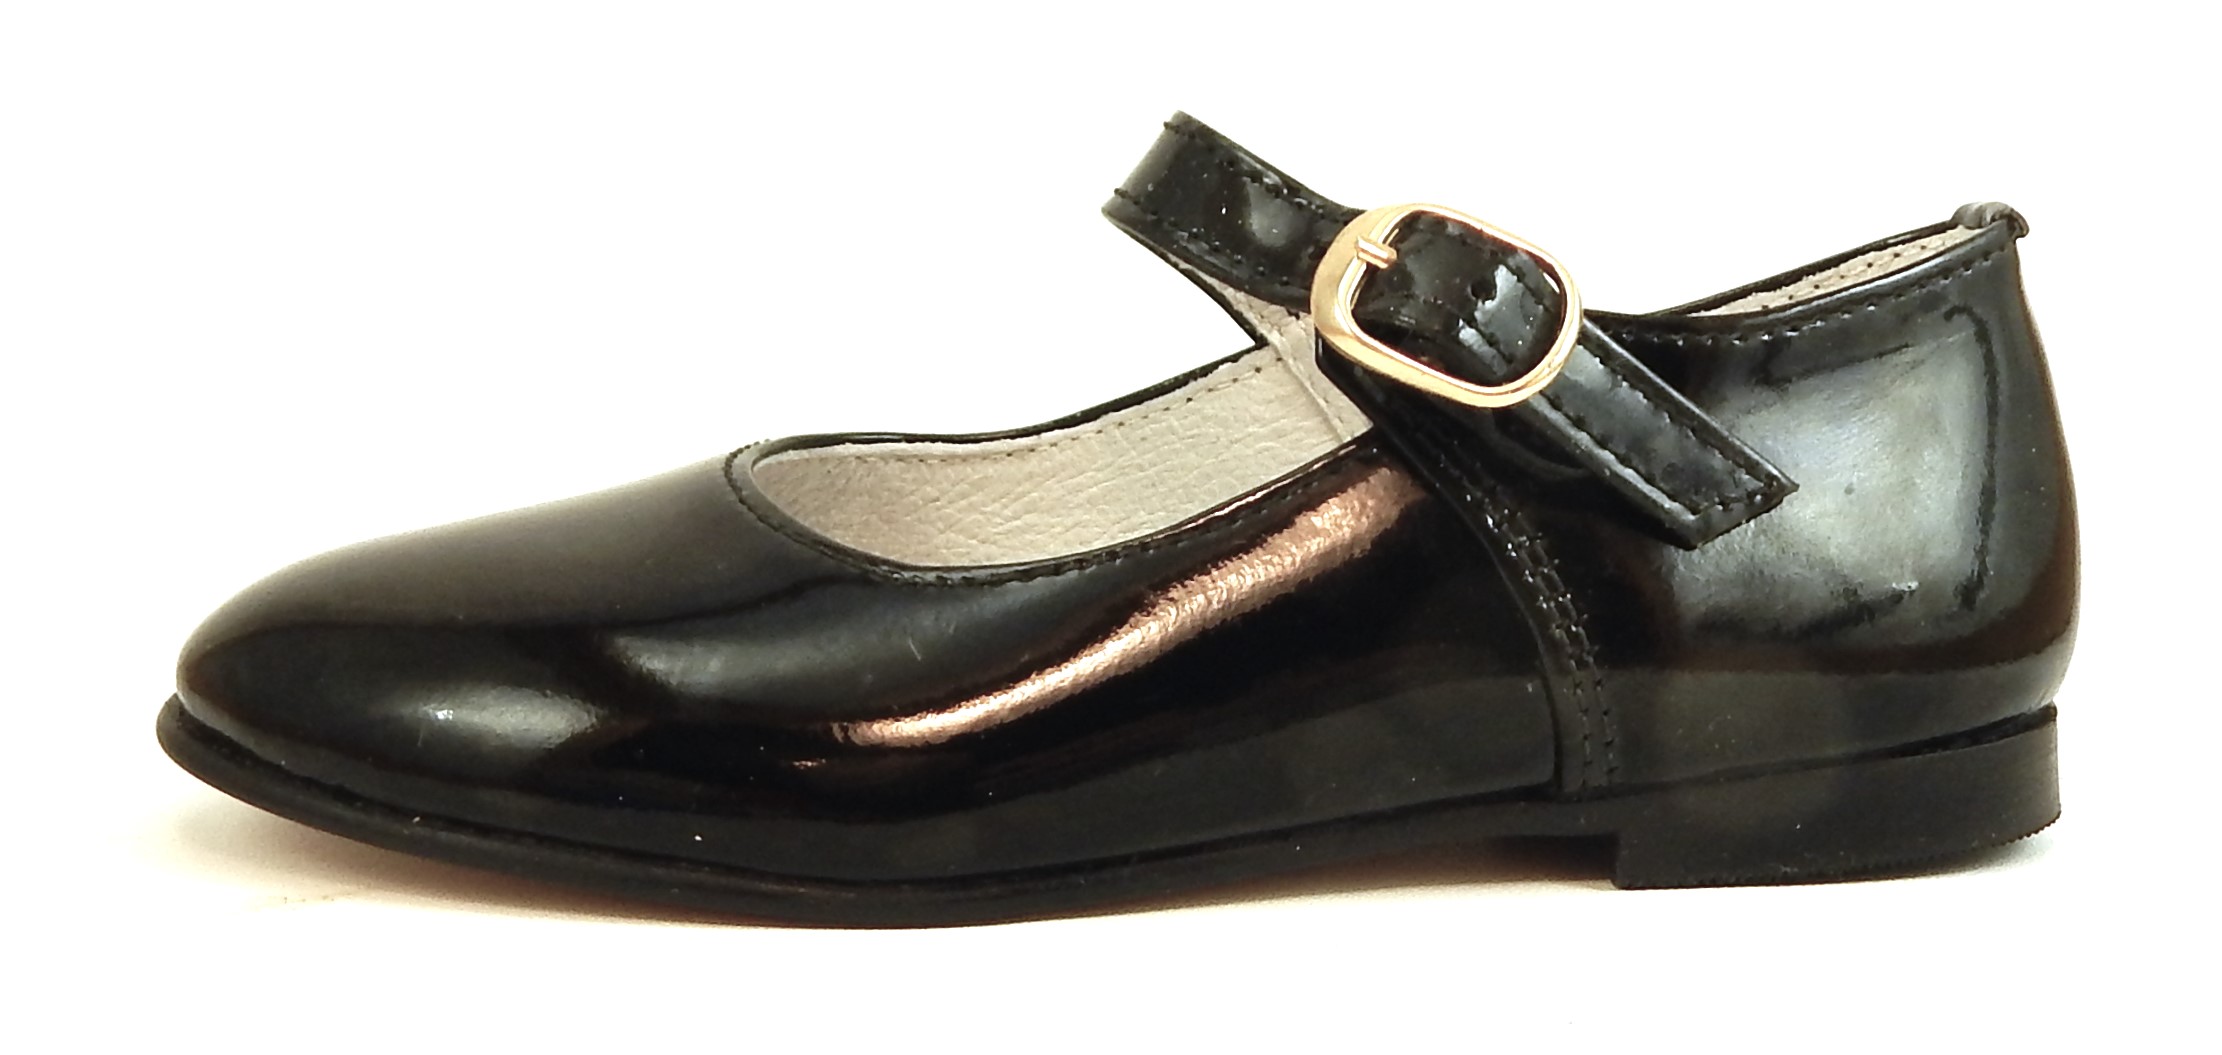 A-1128 - Black Patent Mary Janes